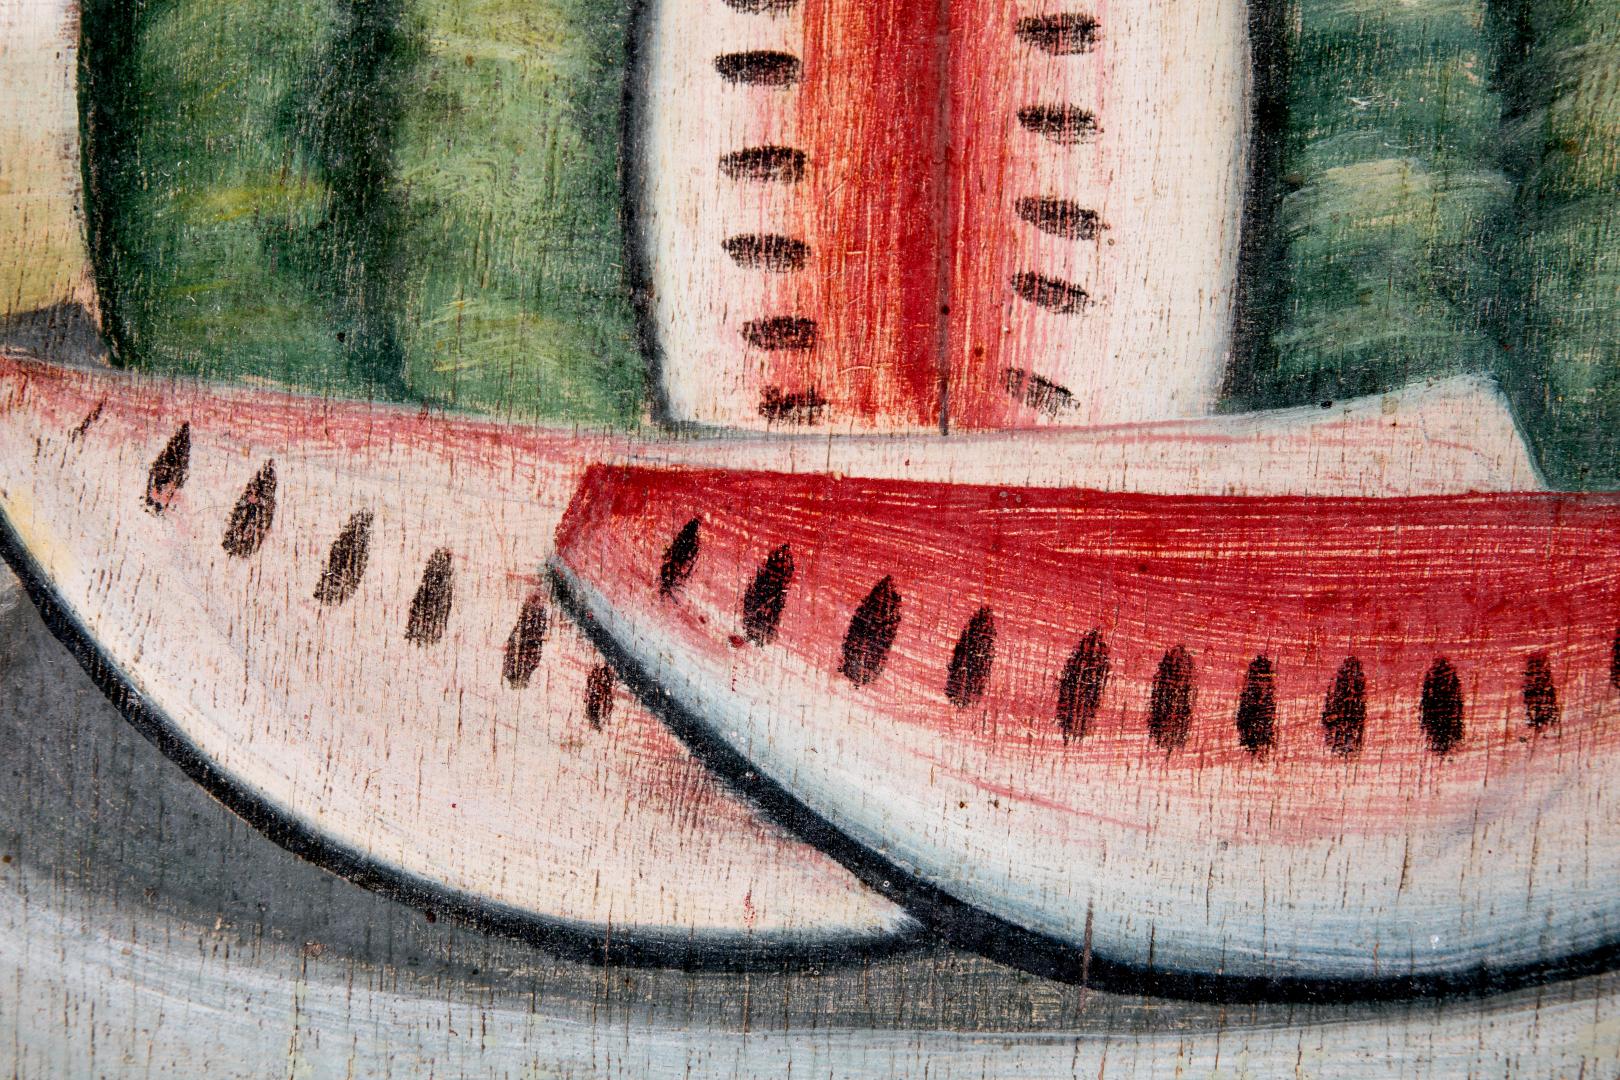 Still life with watermelon and a knife